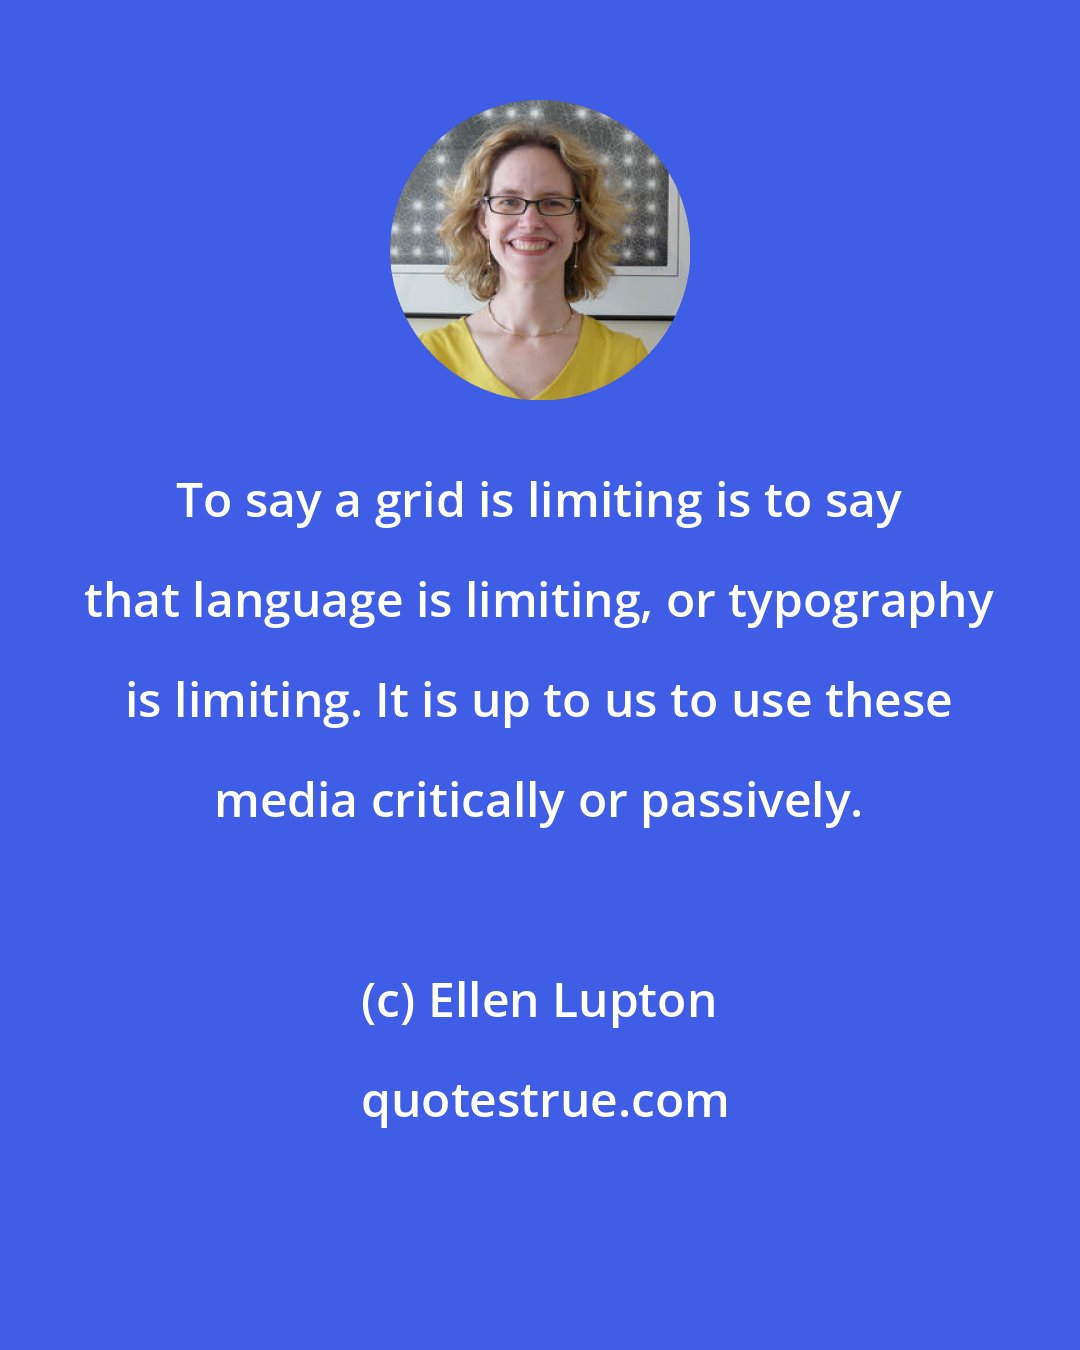 Ellen Lupton: To say a grid is limiting is to say that language is limiting, or typography is limiting. It is up to us to use these media critically or passively.